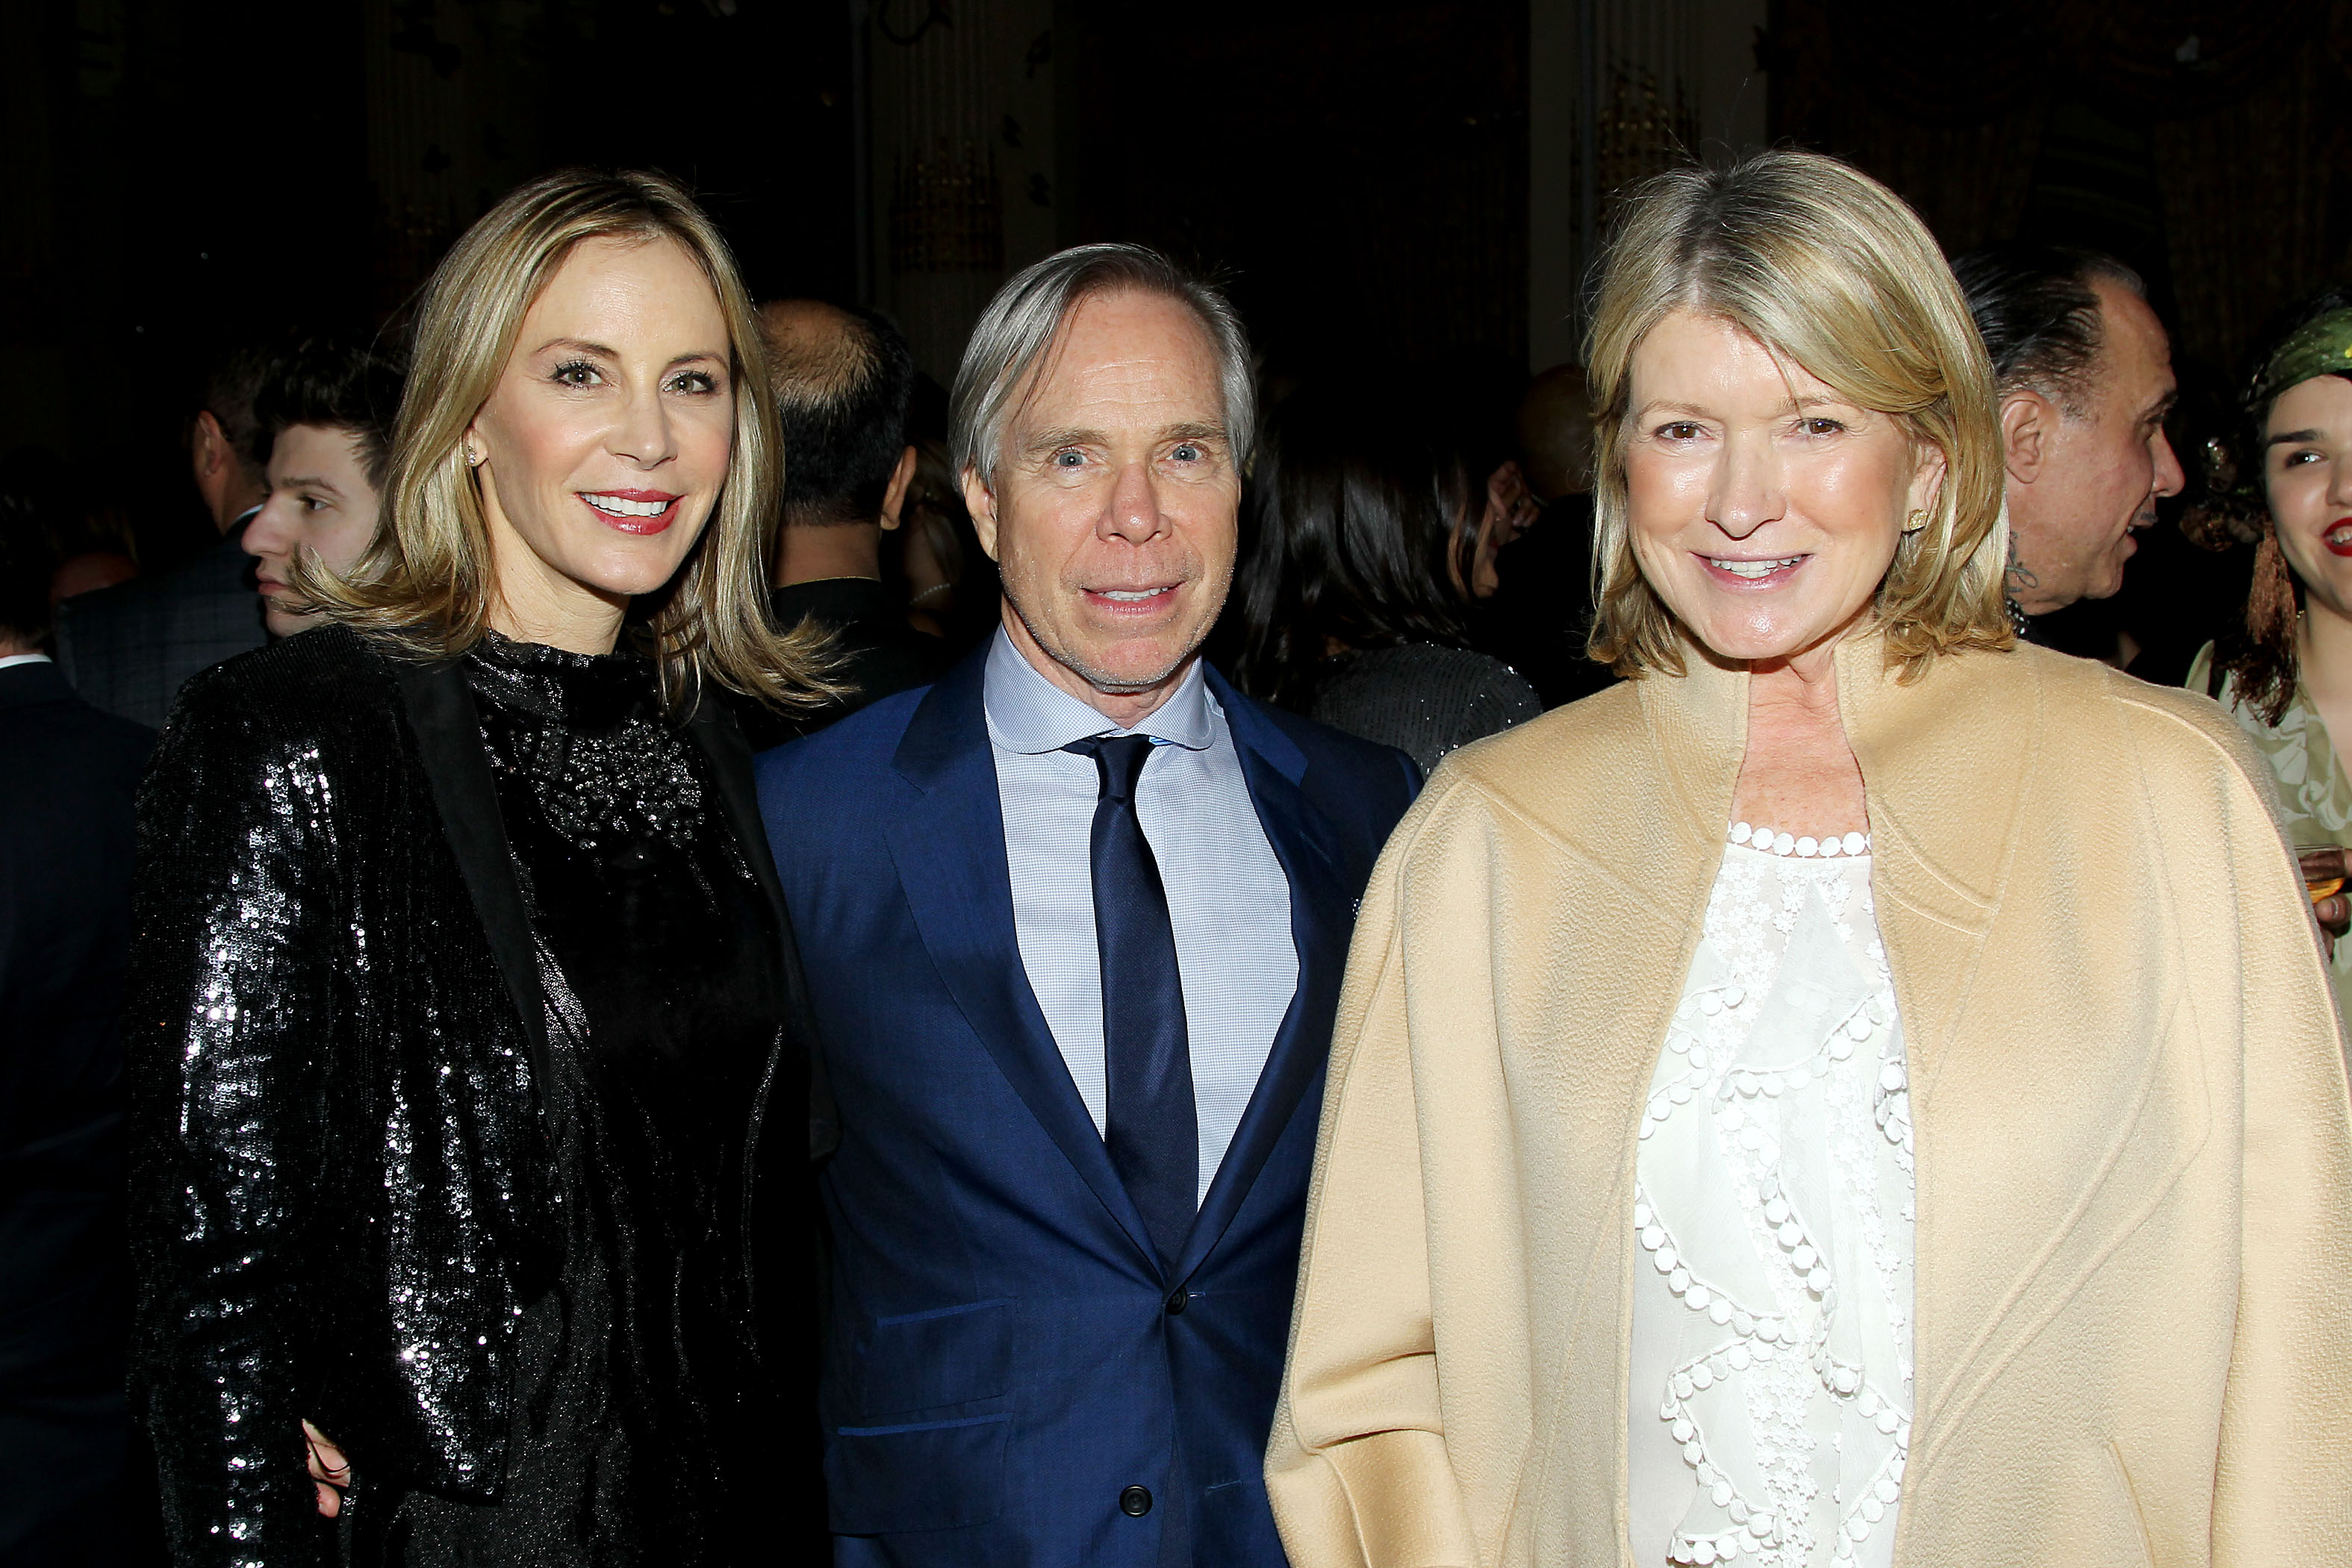 -New York, NY - 05/01/2013 - Moet & Chandon Celebrates "The Great Gatsby" Afterparty -PICTURED: Dee Ocleppo Hilfiger, Tommy Hilfiger, Martha Stewart' -PHOTO by: Dave Allocca/Startraksphoto.com